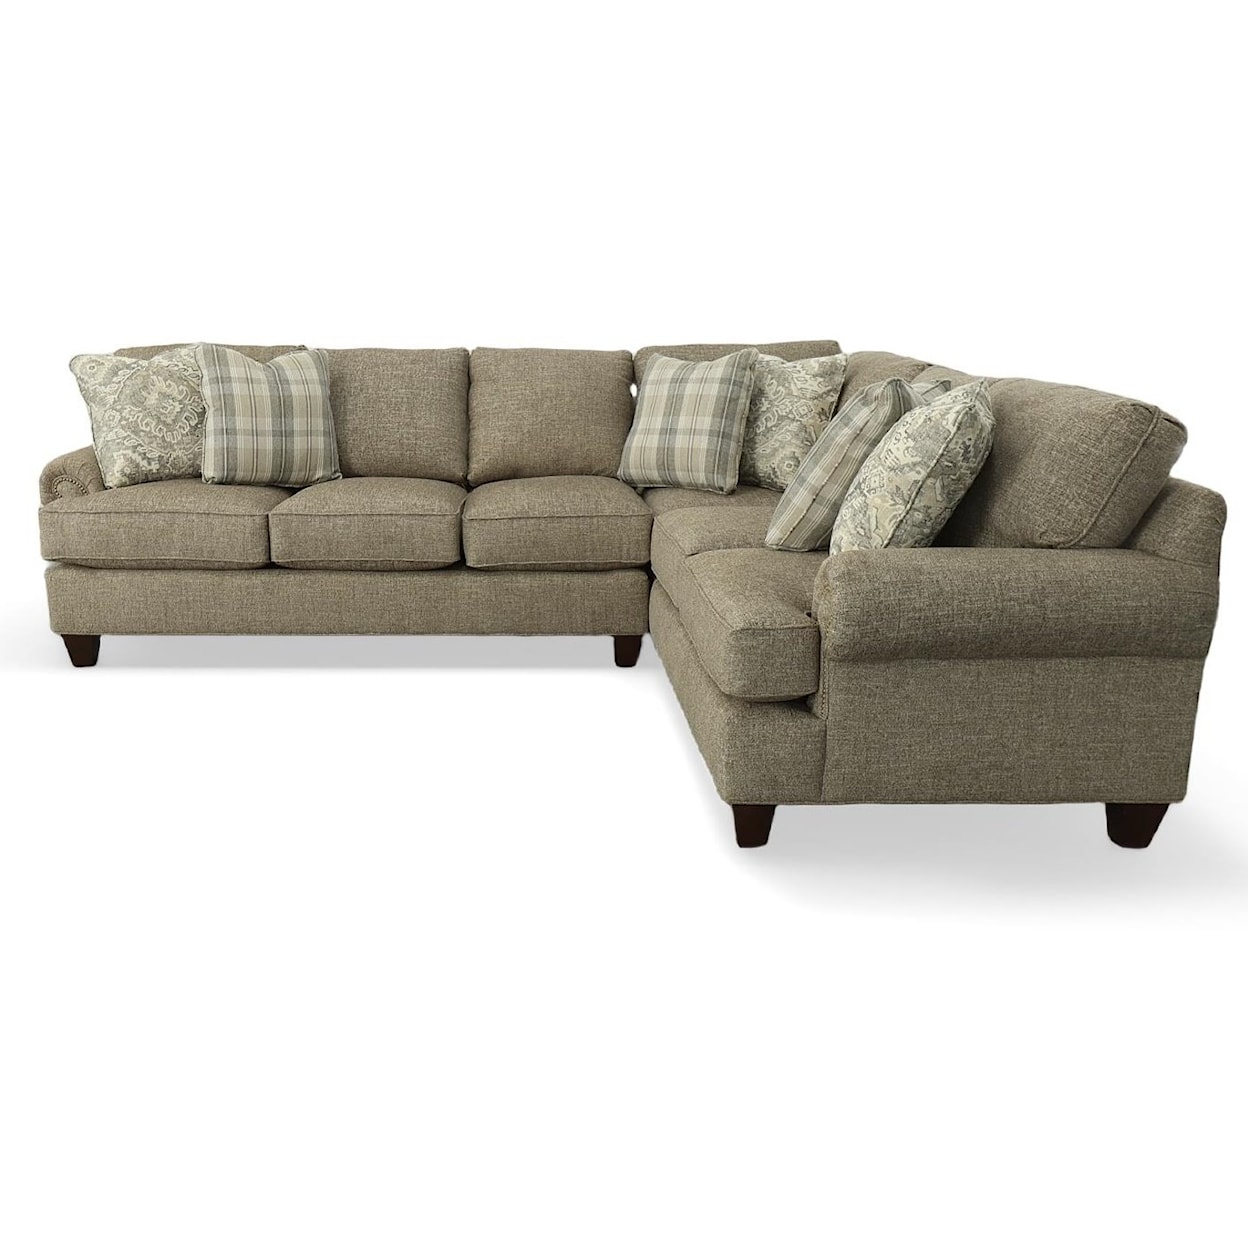 Craftmaster C9 Custom Collection 2 PC Sectional